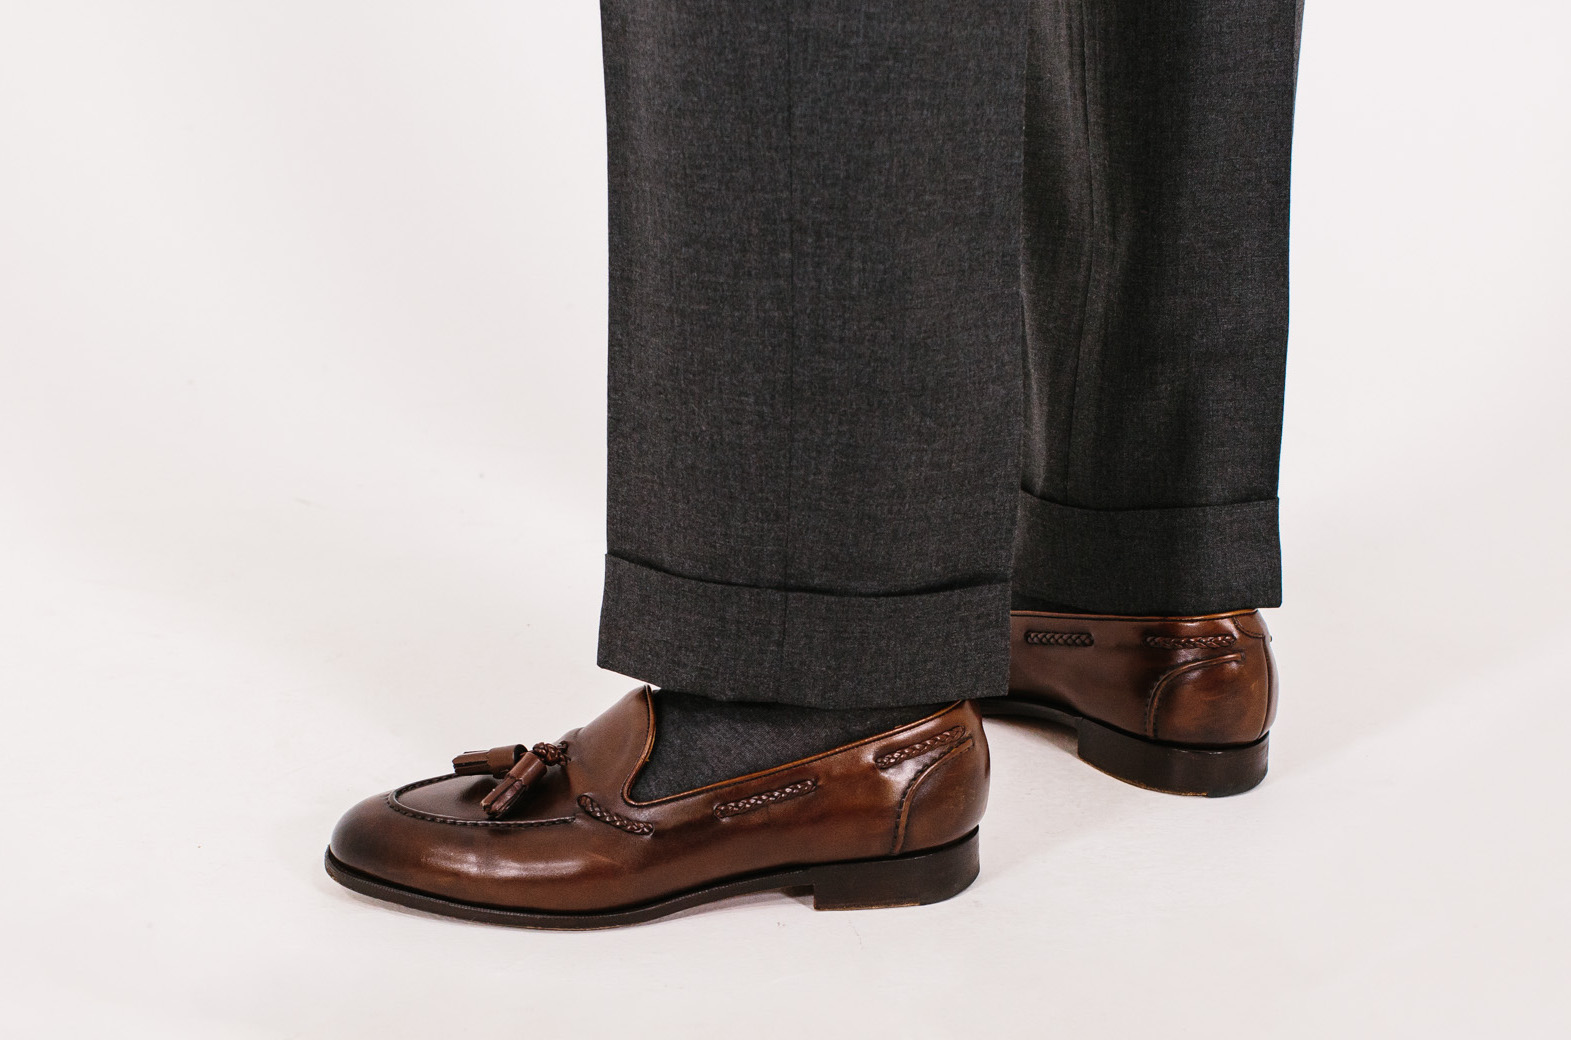 How great things age: The Belgravia loafer from Edward Green